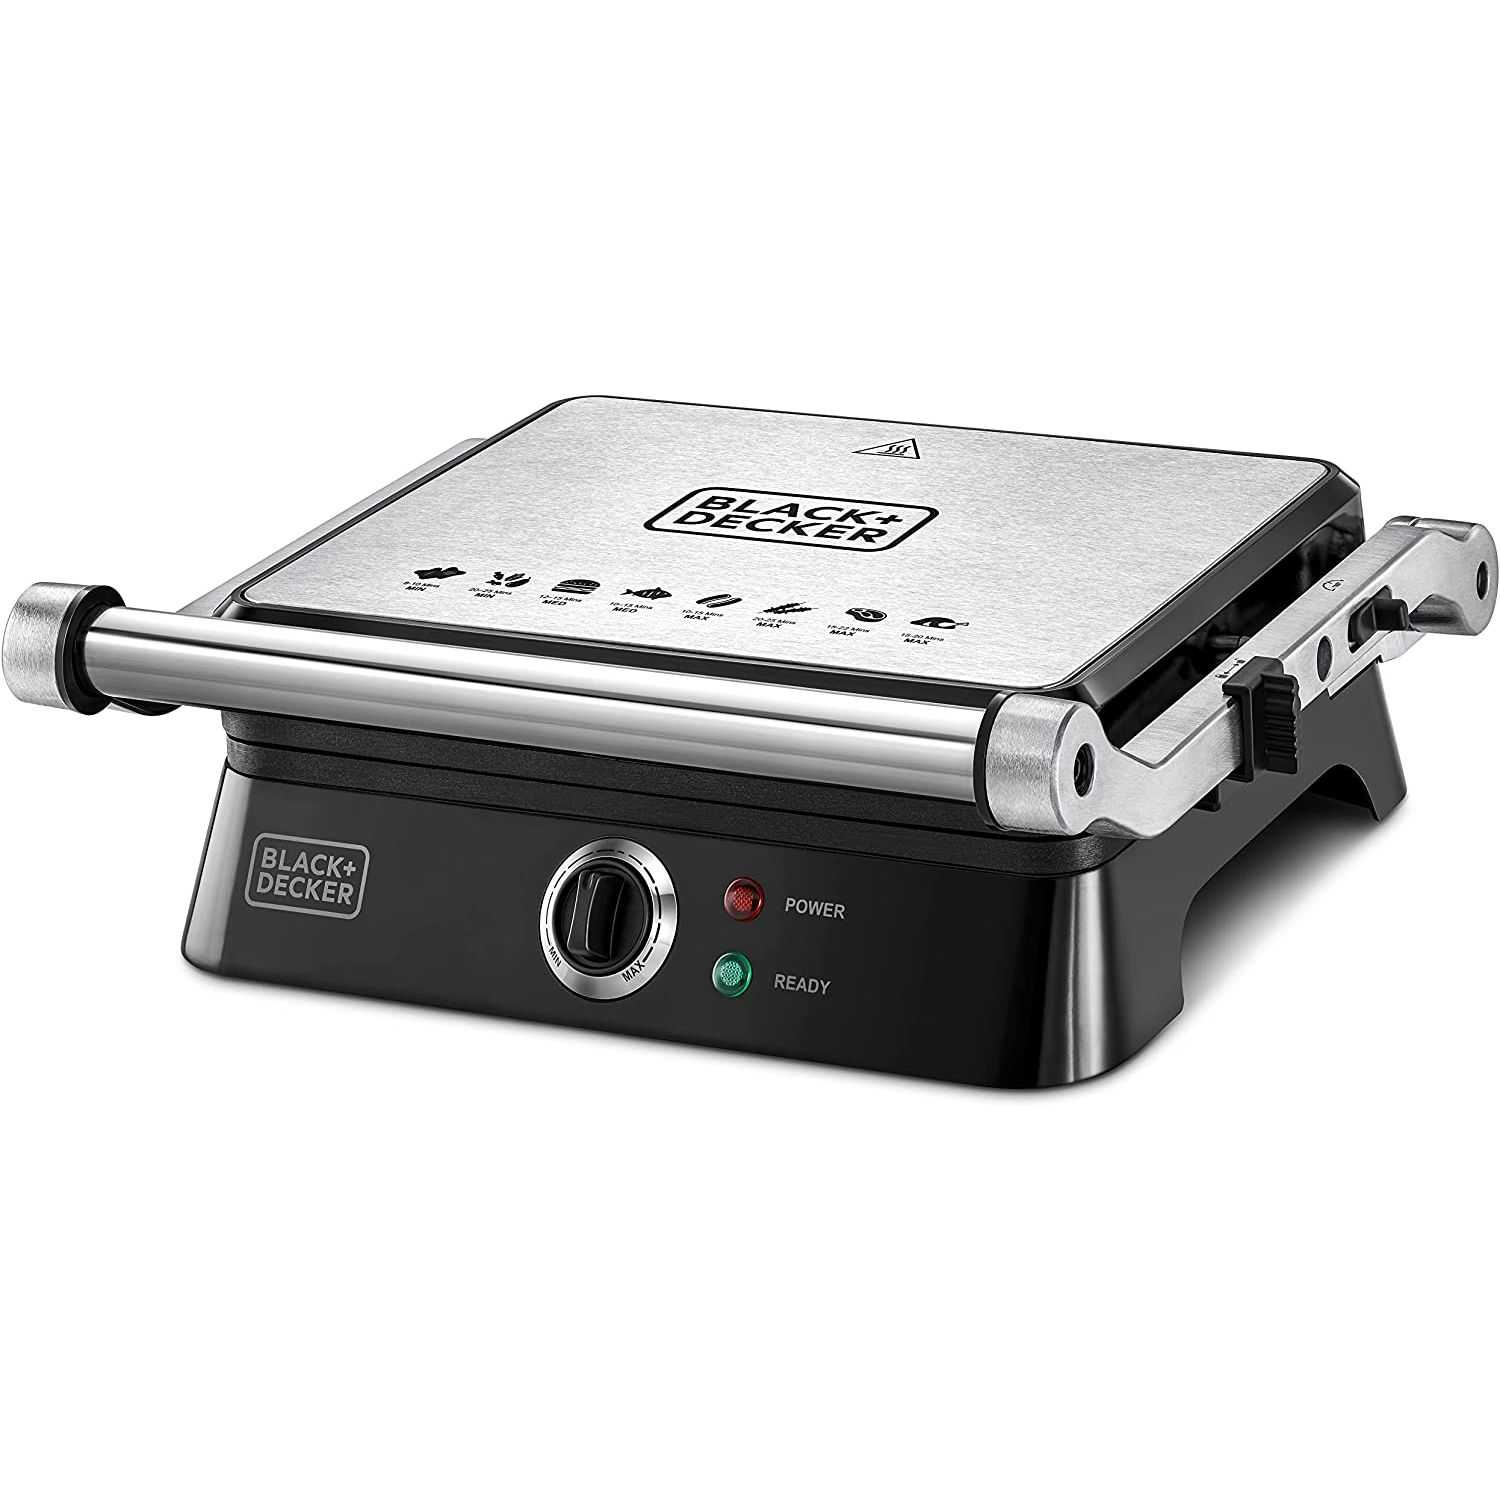 1400w contact grill with full flat grill for barbecue, black